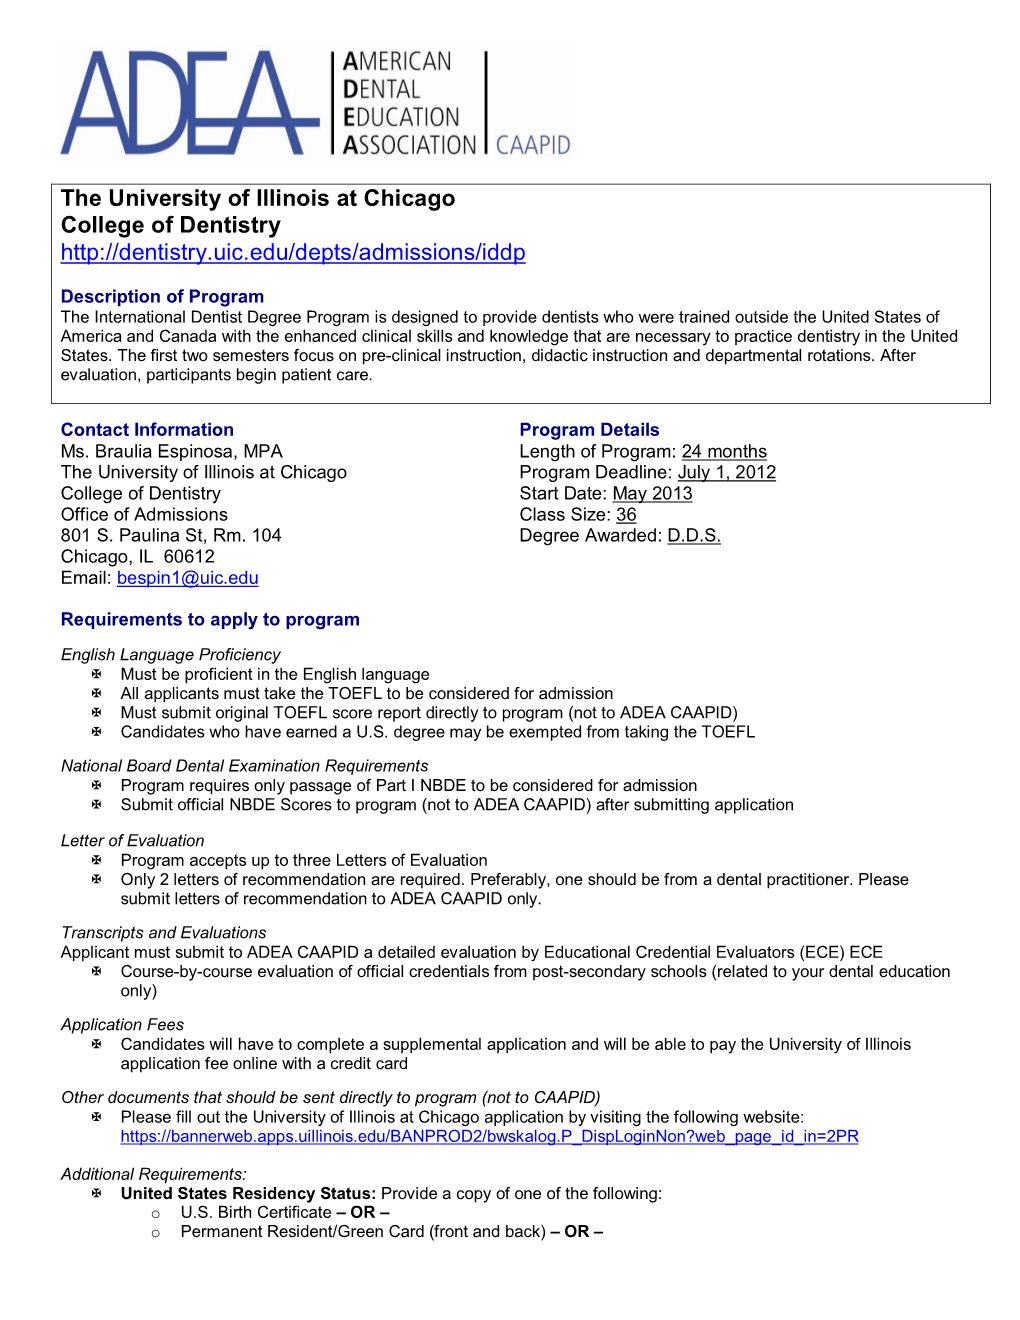 The University of Illinois at Chicago College of Dentistry